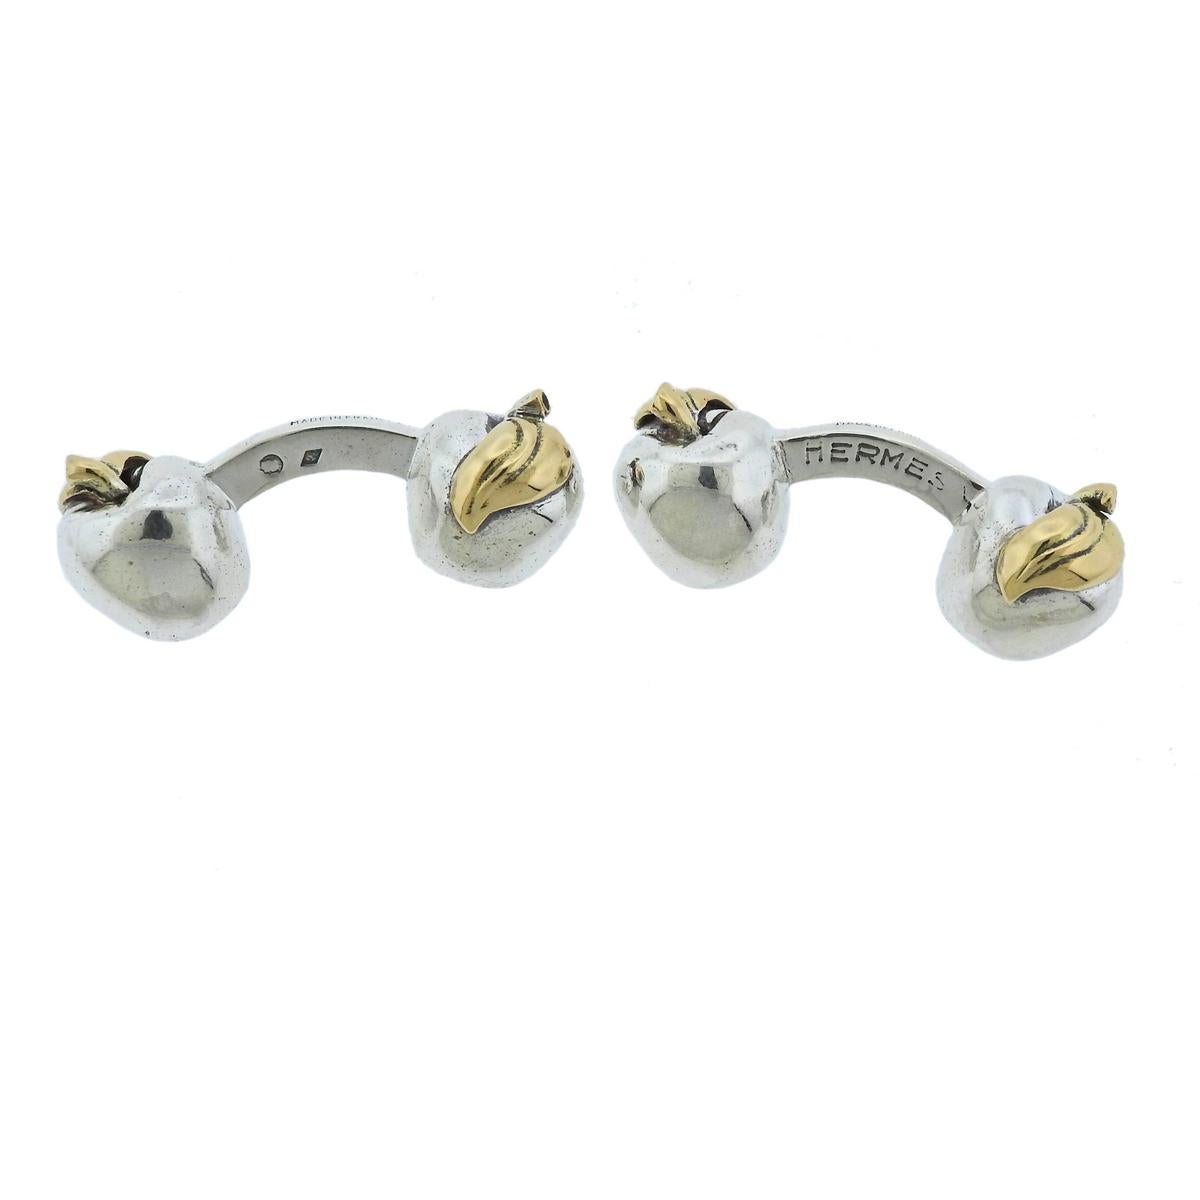 Pair of sterling silver and 18k gold apple cufflinks, designed by Hermes. Each top (apple) measures 11mm x 9mm, weigh 22.3 grams. Marked: Hermes, Punchmarks.